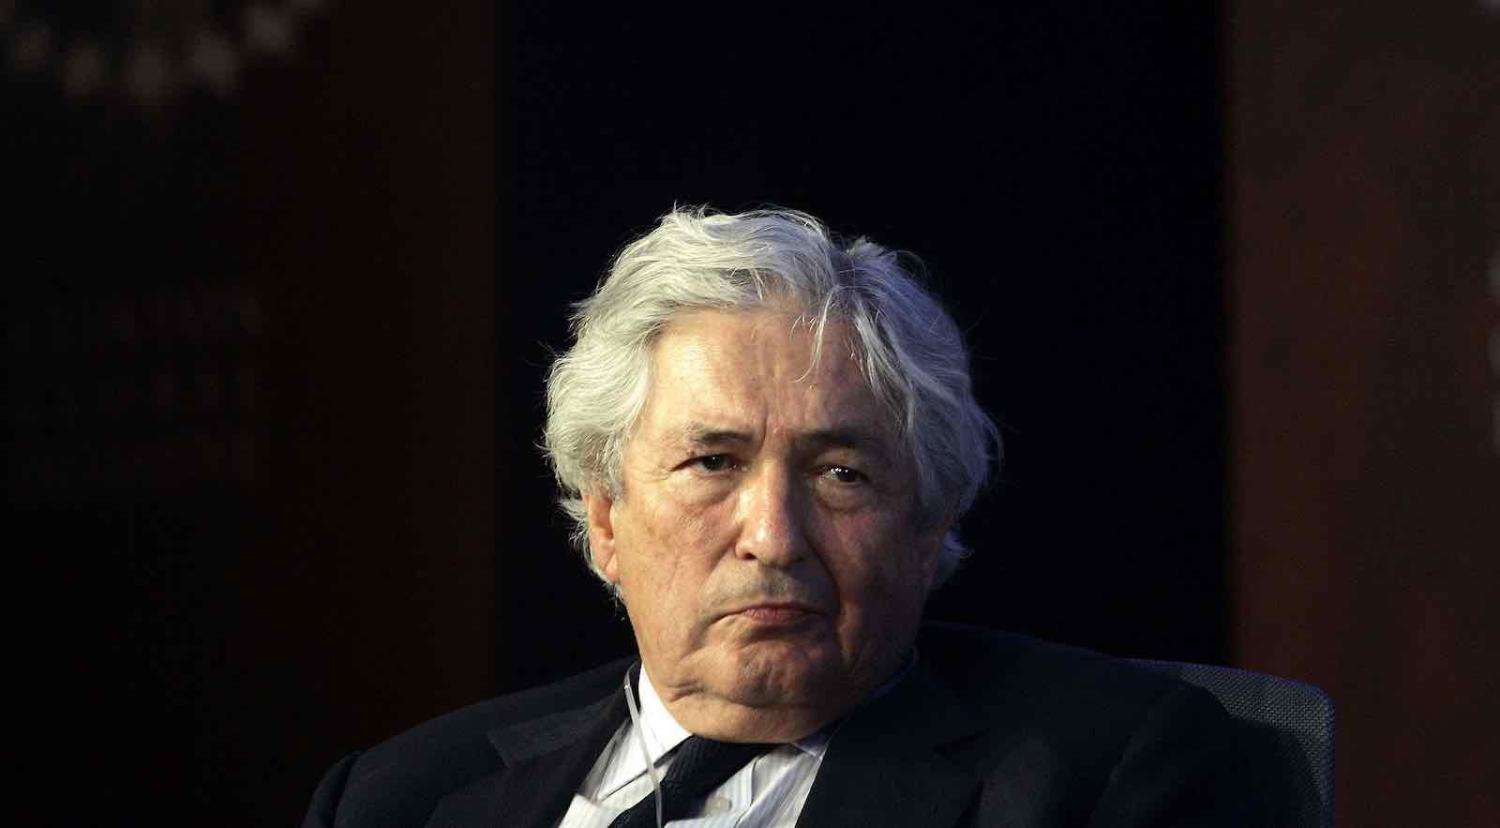 Former World Bank president James Wolfensohn in 2006 at the Clinton Global Initiative annual meeting in New York (Chris Hondros/Getty Images) 